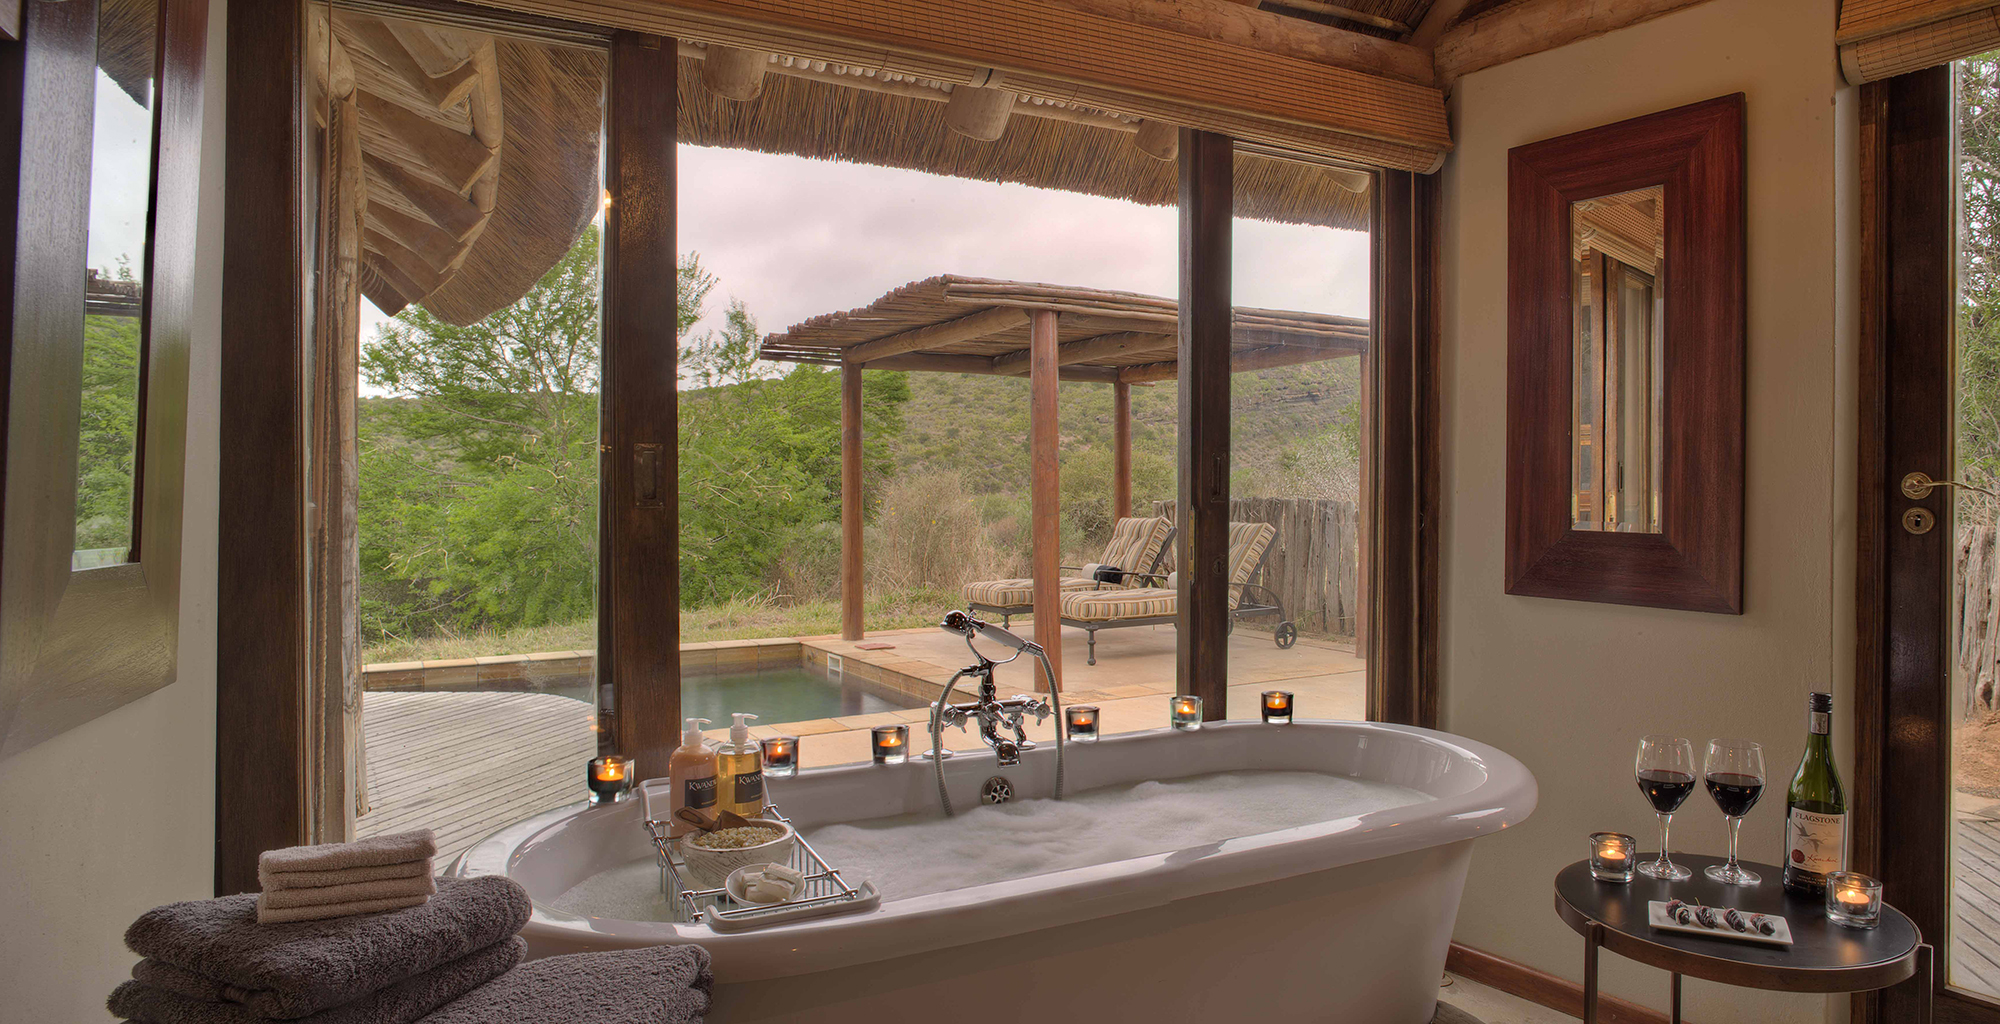 South-Africa-Great-Fish-River-Lodge-Bathroom